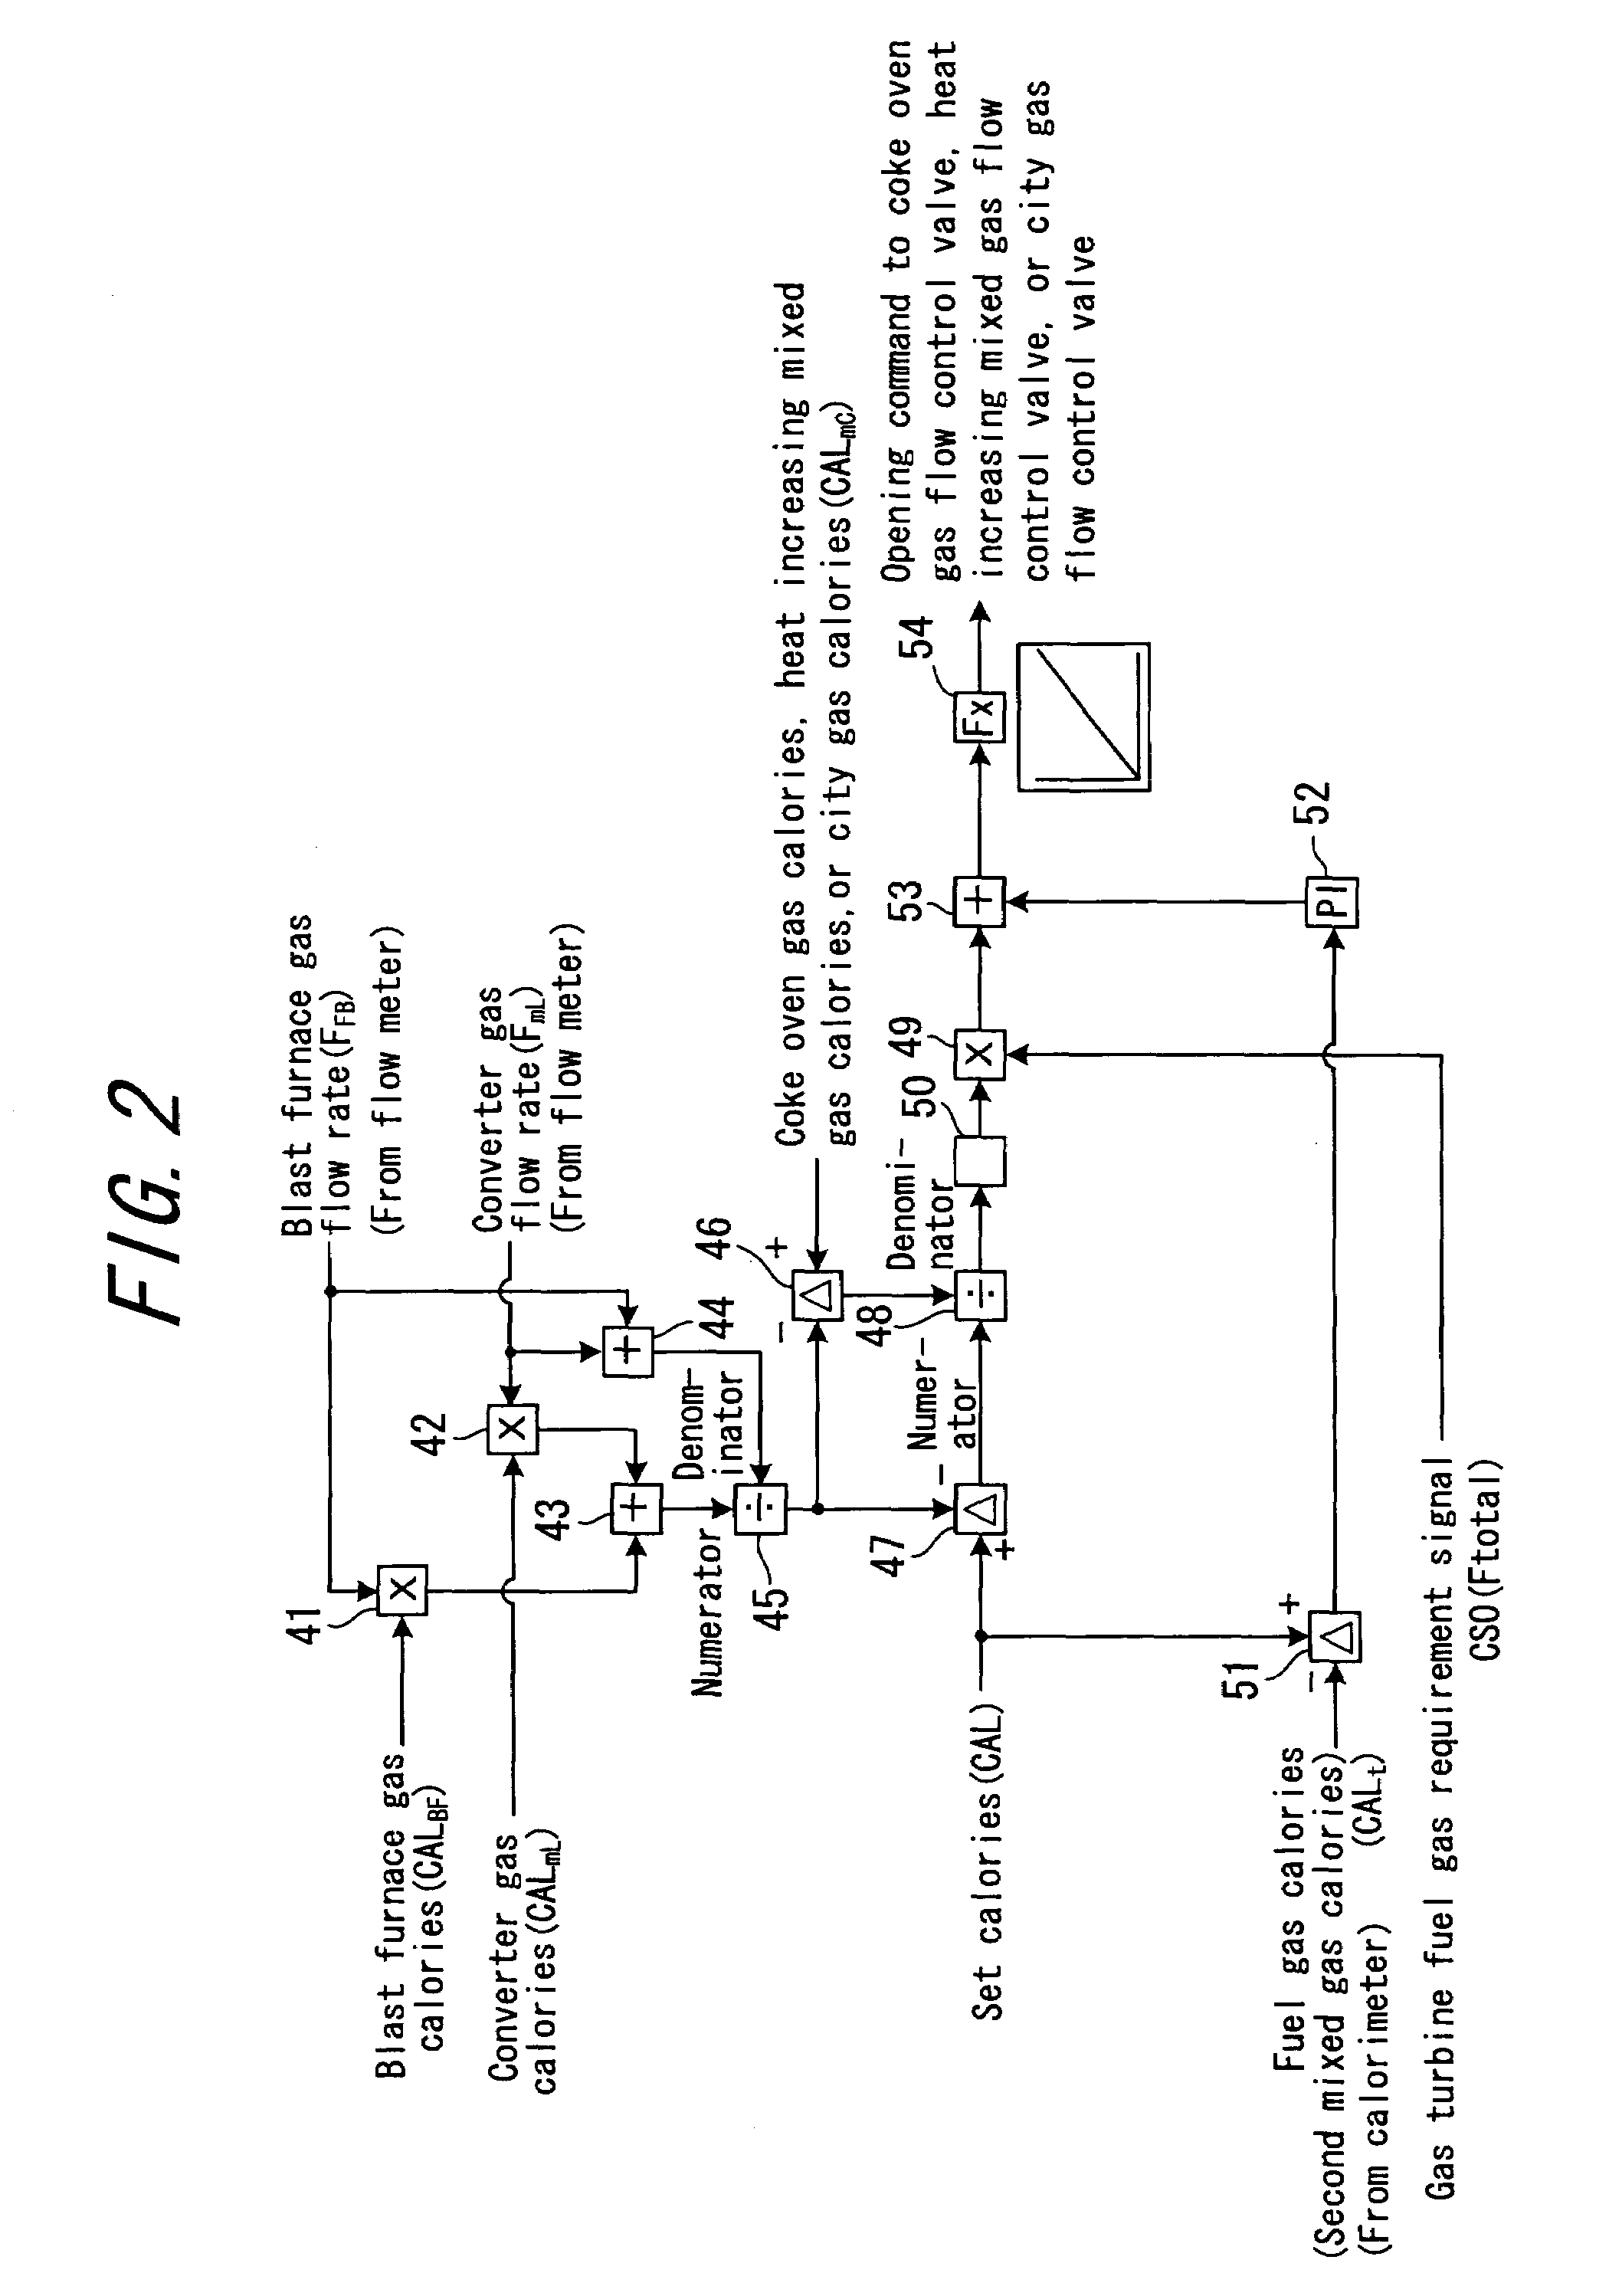 Fuel gas calorie control method and device